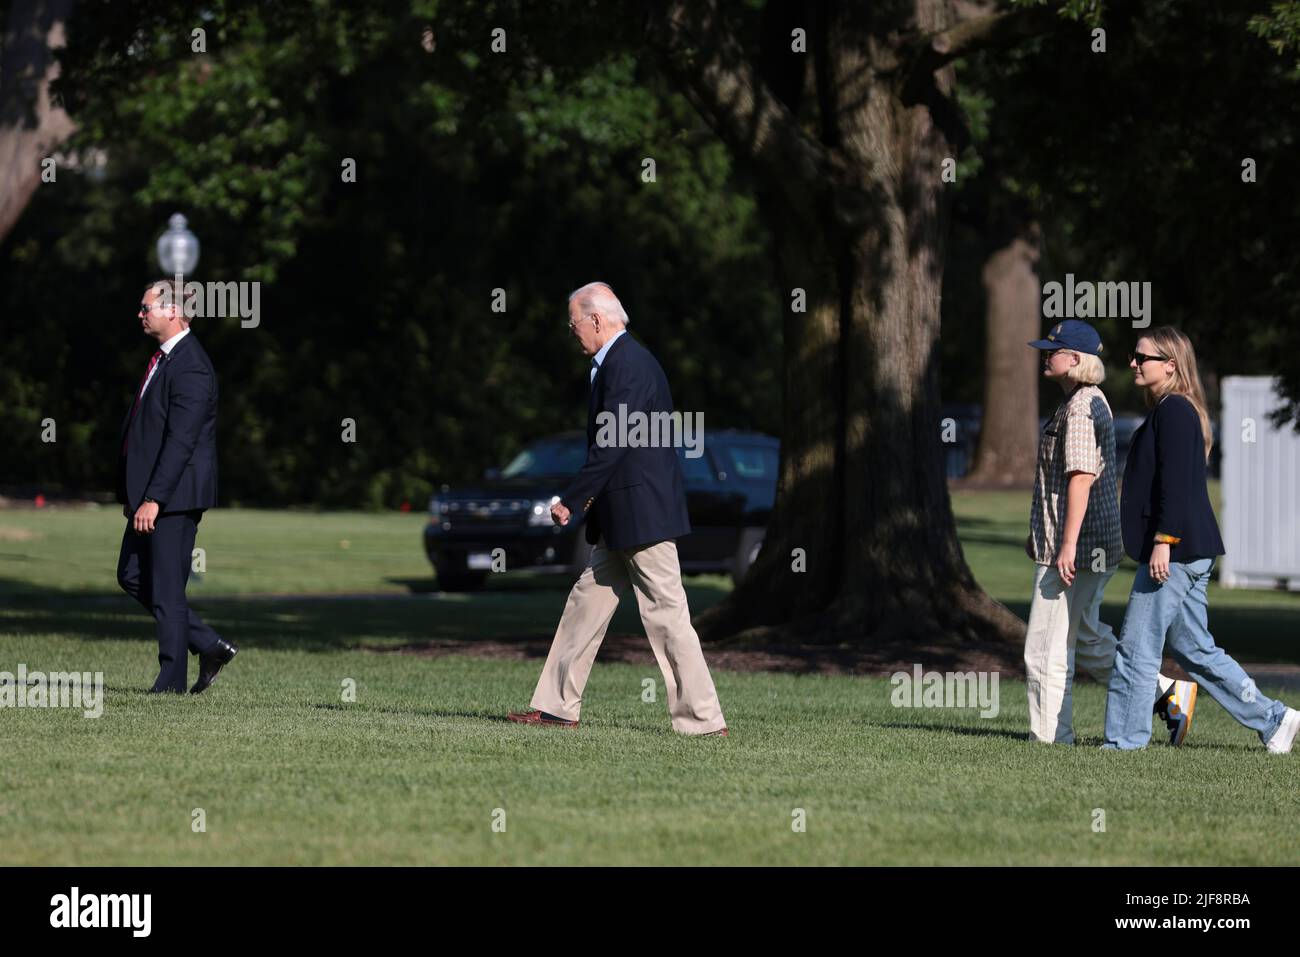 United States President Joe Biden, arrives on the South Lawn of the White House alongside his 2 granddaughters, Finnegan Biden and Maisy Biden, on June 30, 2022 in Washington, DC. Biden returned to Washington after attending summits in Germany and Spain.Credit: Oliver Contreras/Pool via CNP /MediaPunch Stock Photo